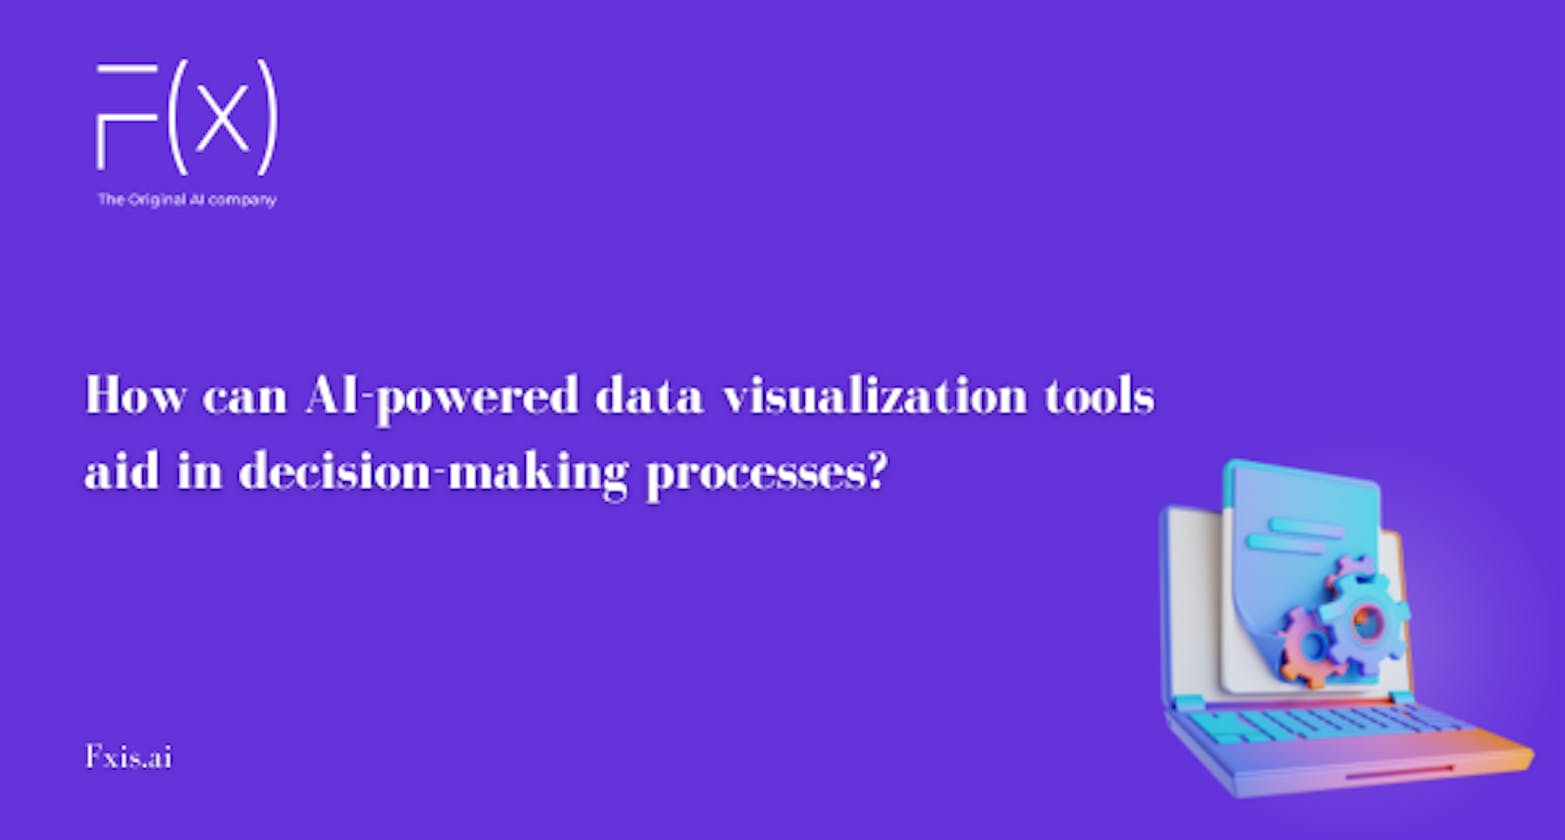 How can AI-powered data visualization tools aid in decision-making processes?